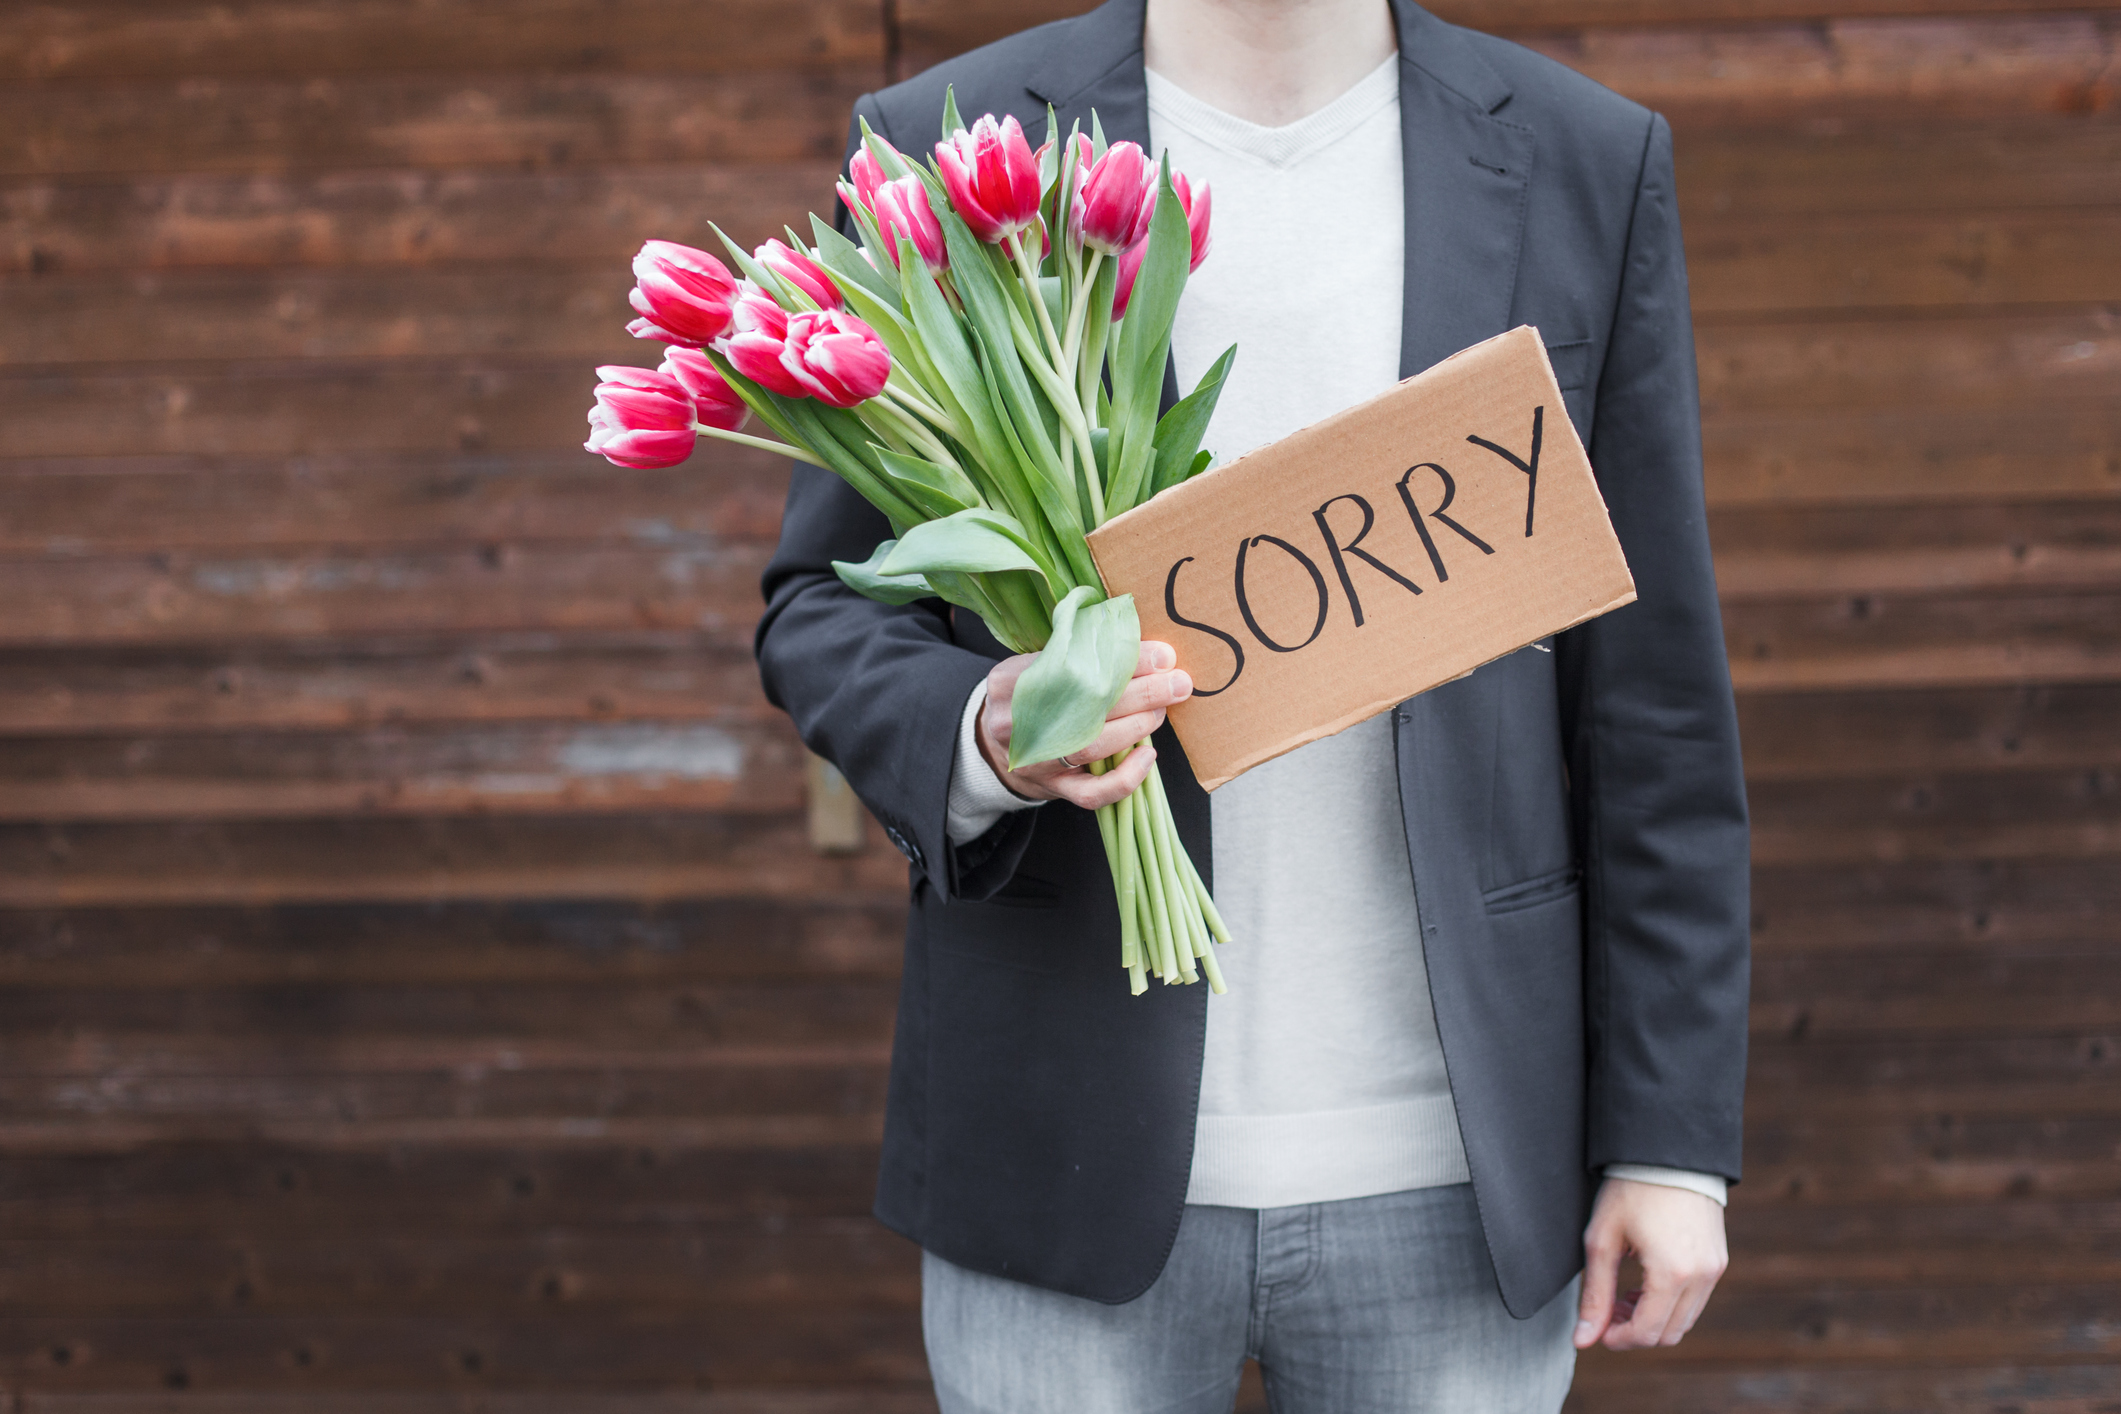 Man apologizing with flowers